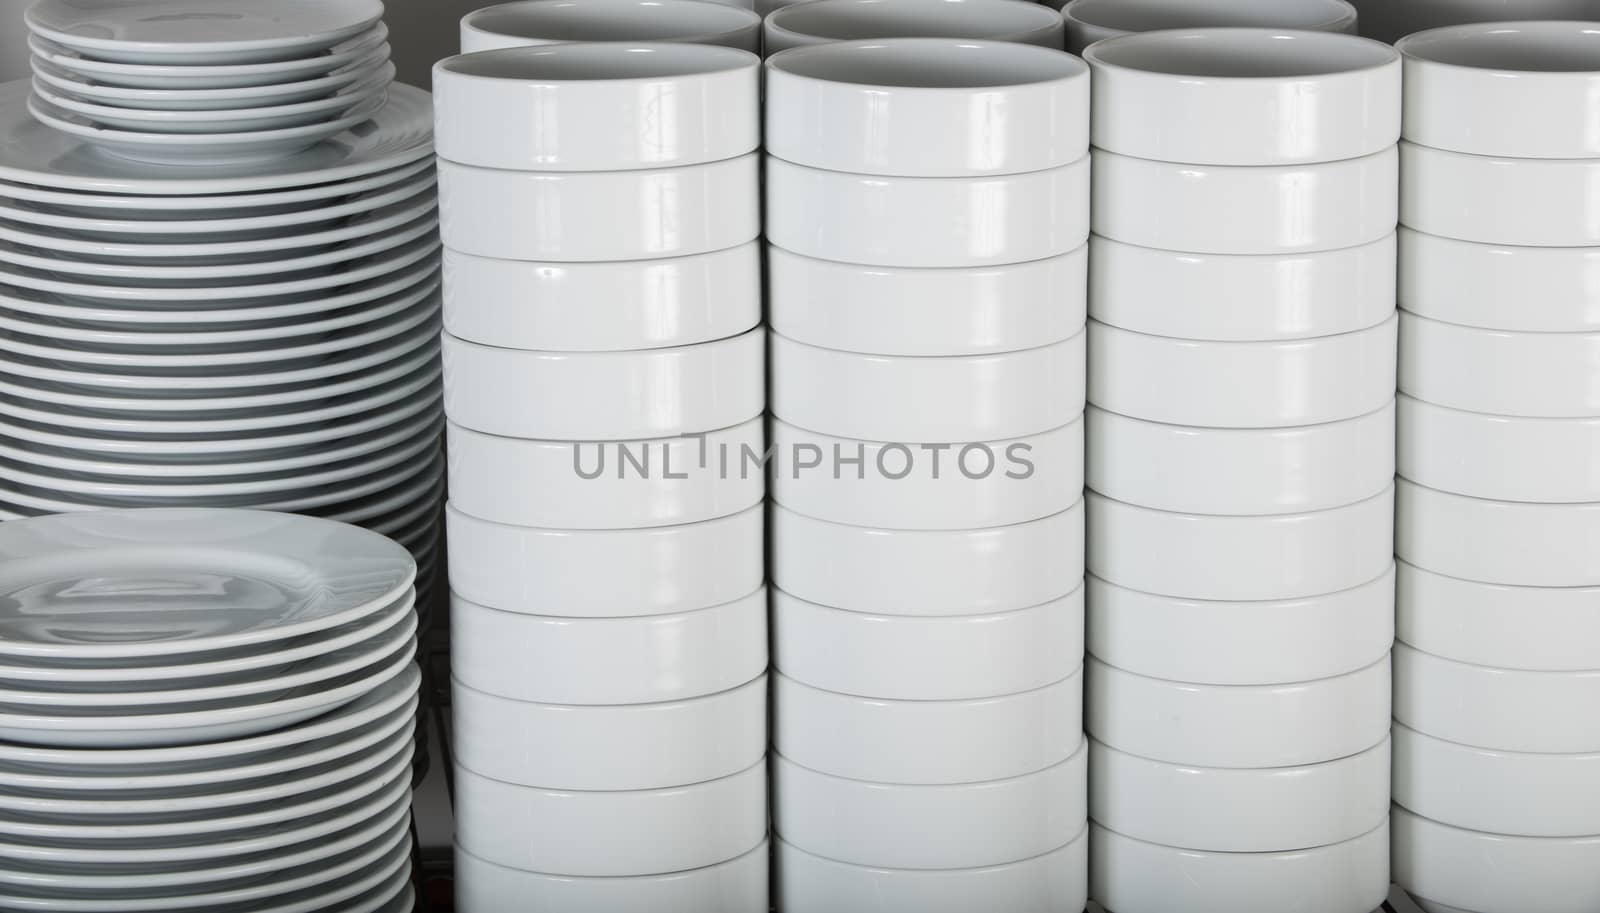 stacks of many white plates on a wire rack shelf in a commercial kitchen